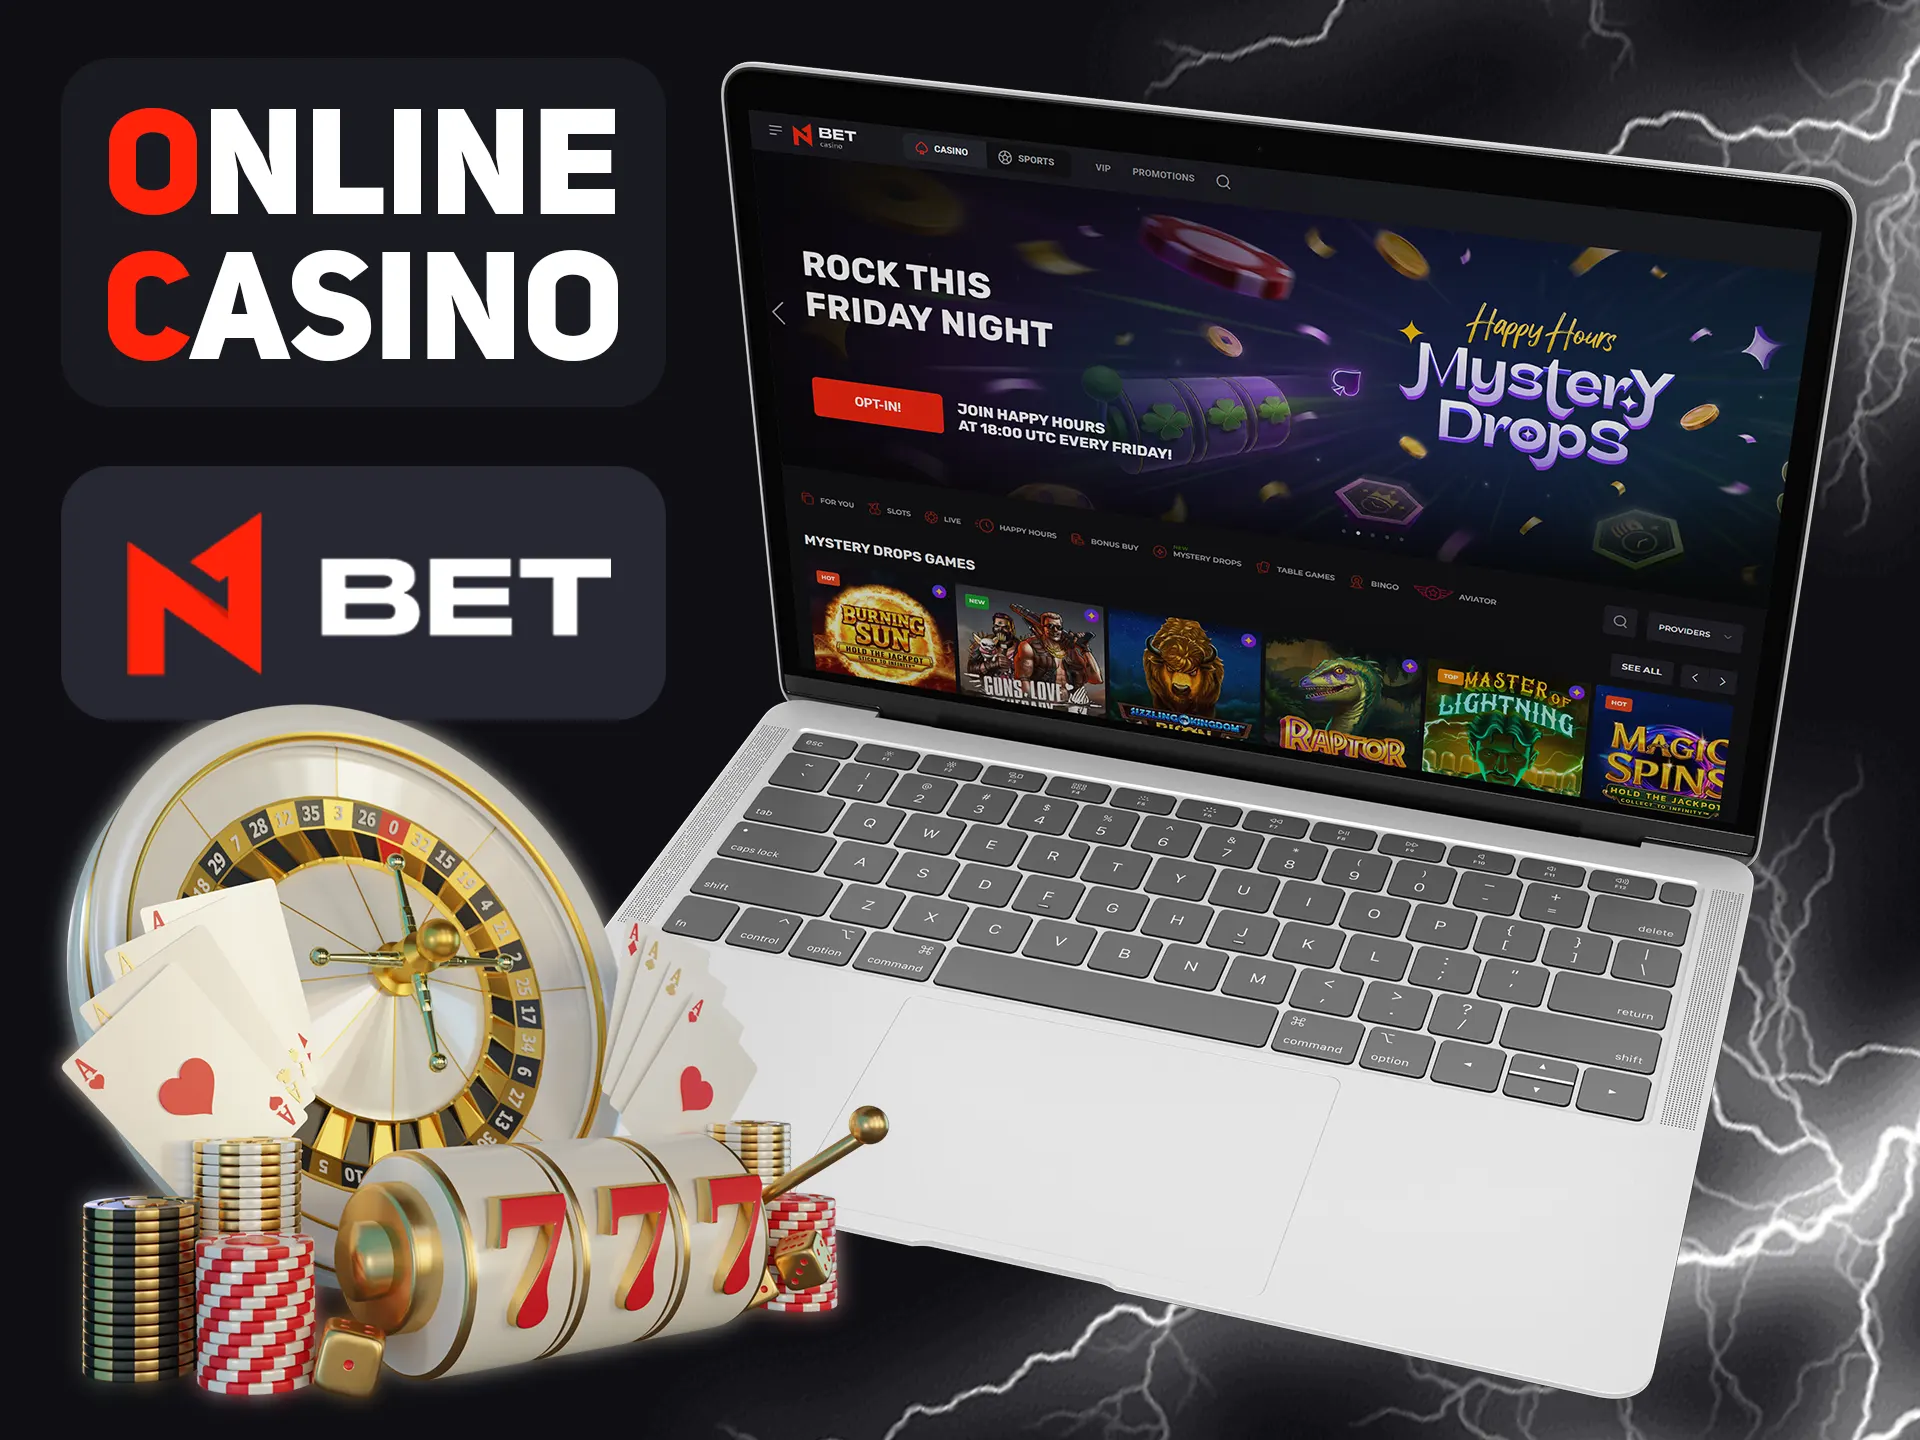 Play your favourite casino games at N1bet casino.